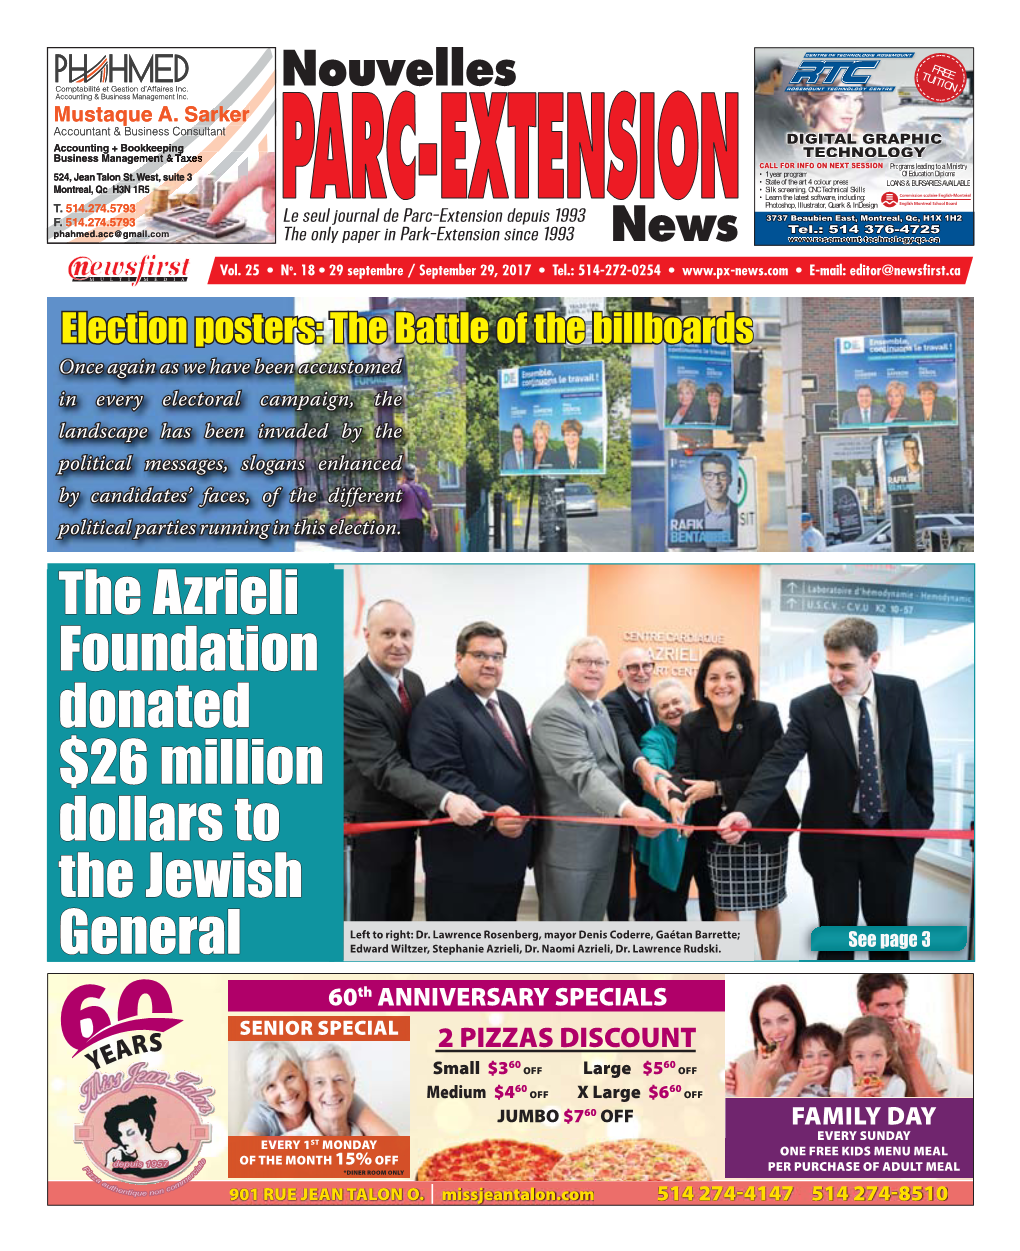 The Azrieli Foundation Donated $26 Million Dollars to the Jewish General